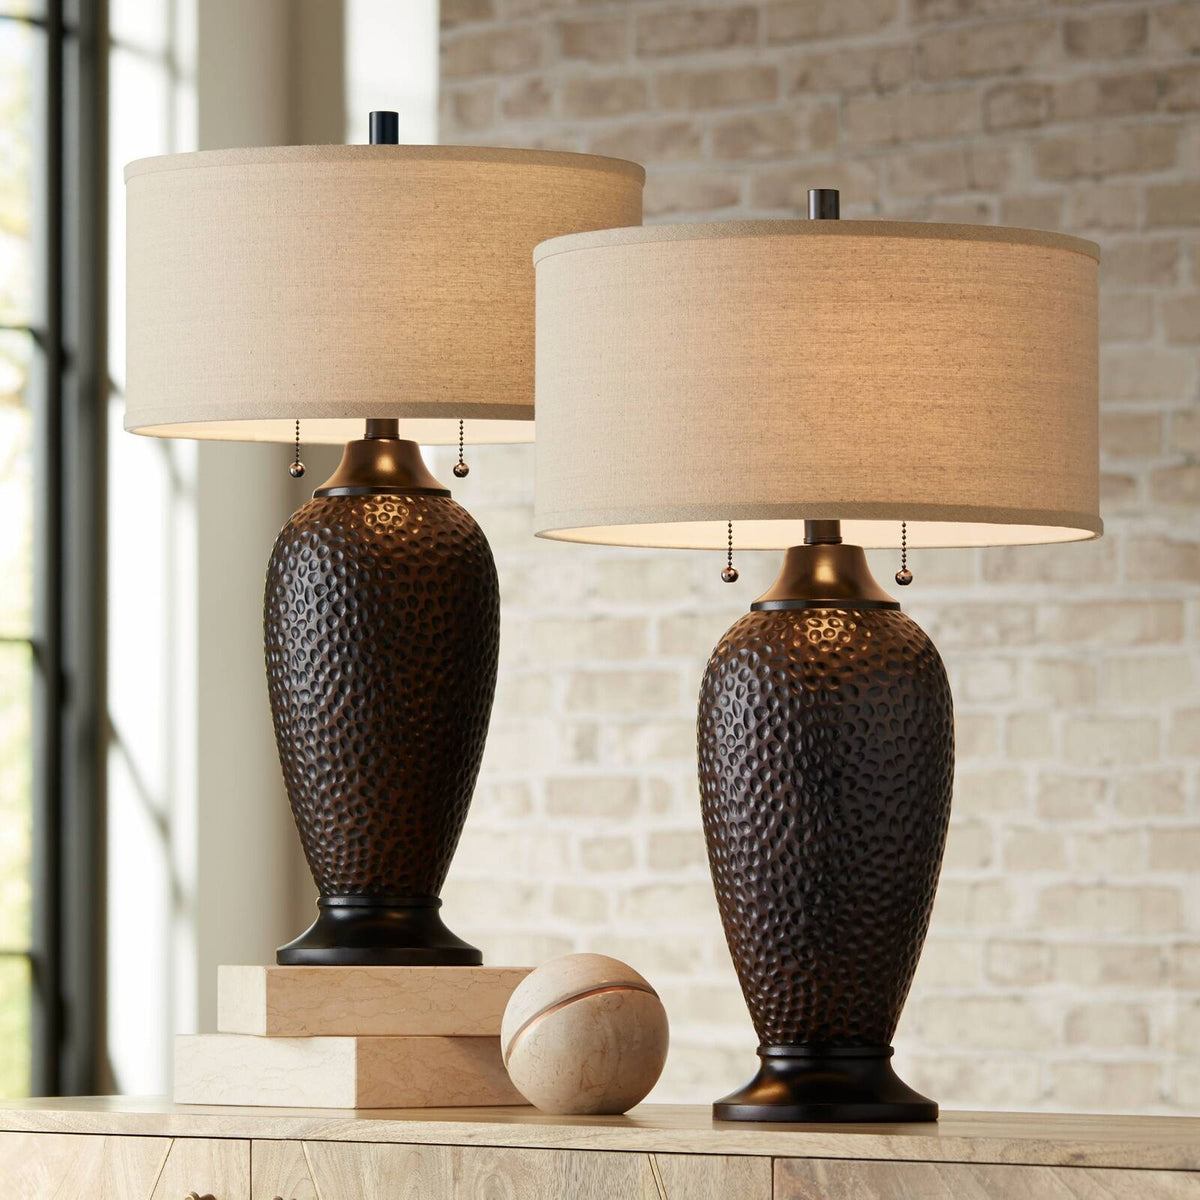 2pcs Hammered Bronze Finish Table Lamps With Oatmeal Linen Drum Shades